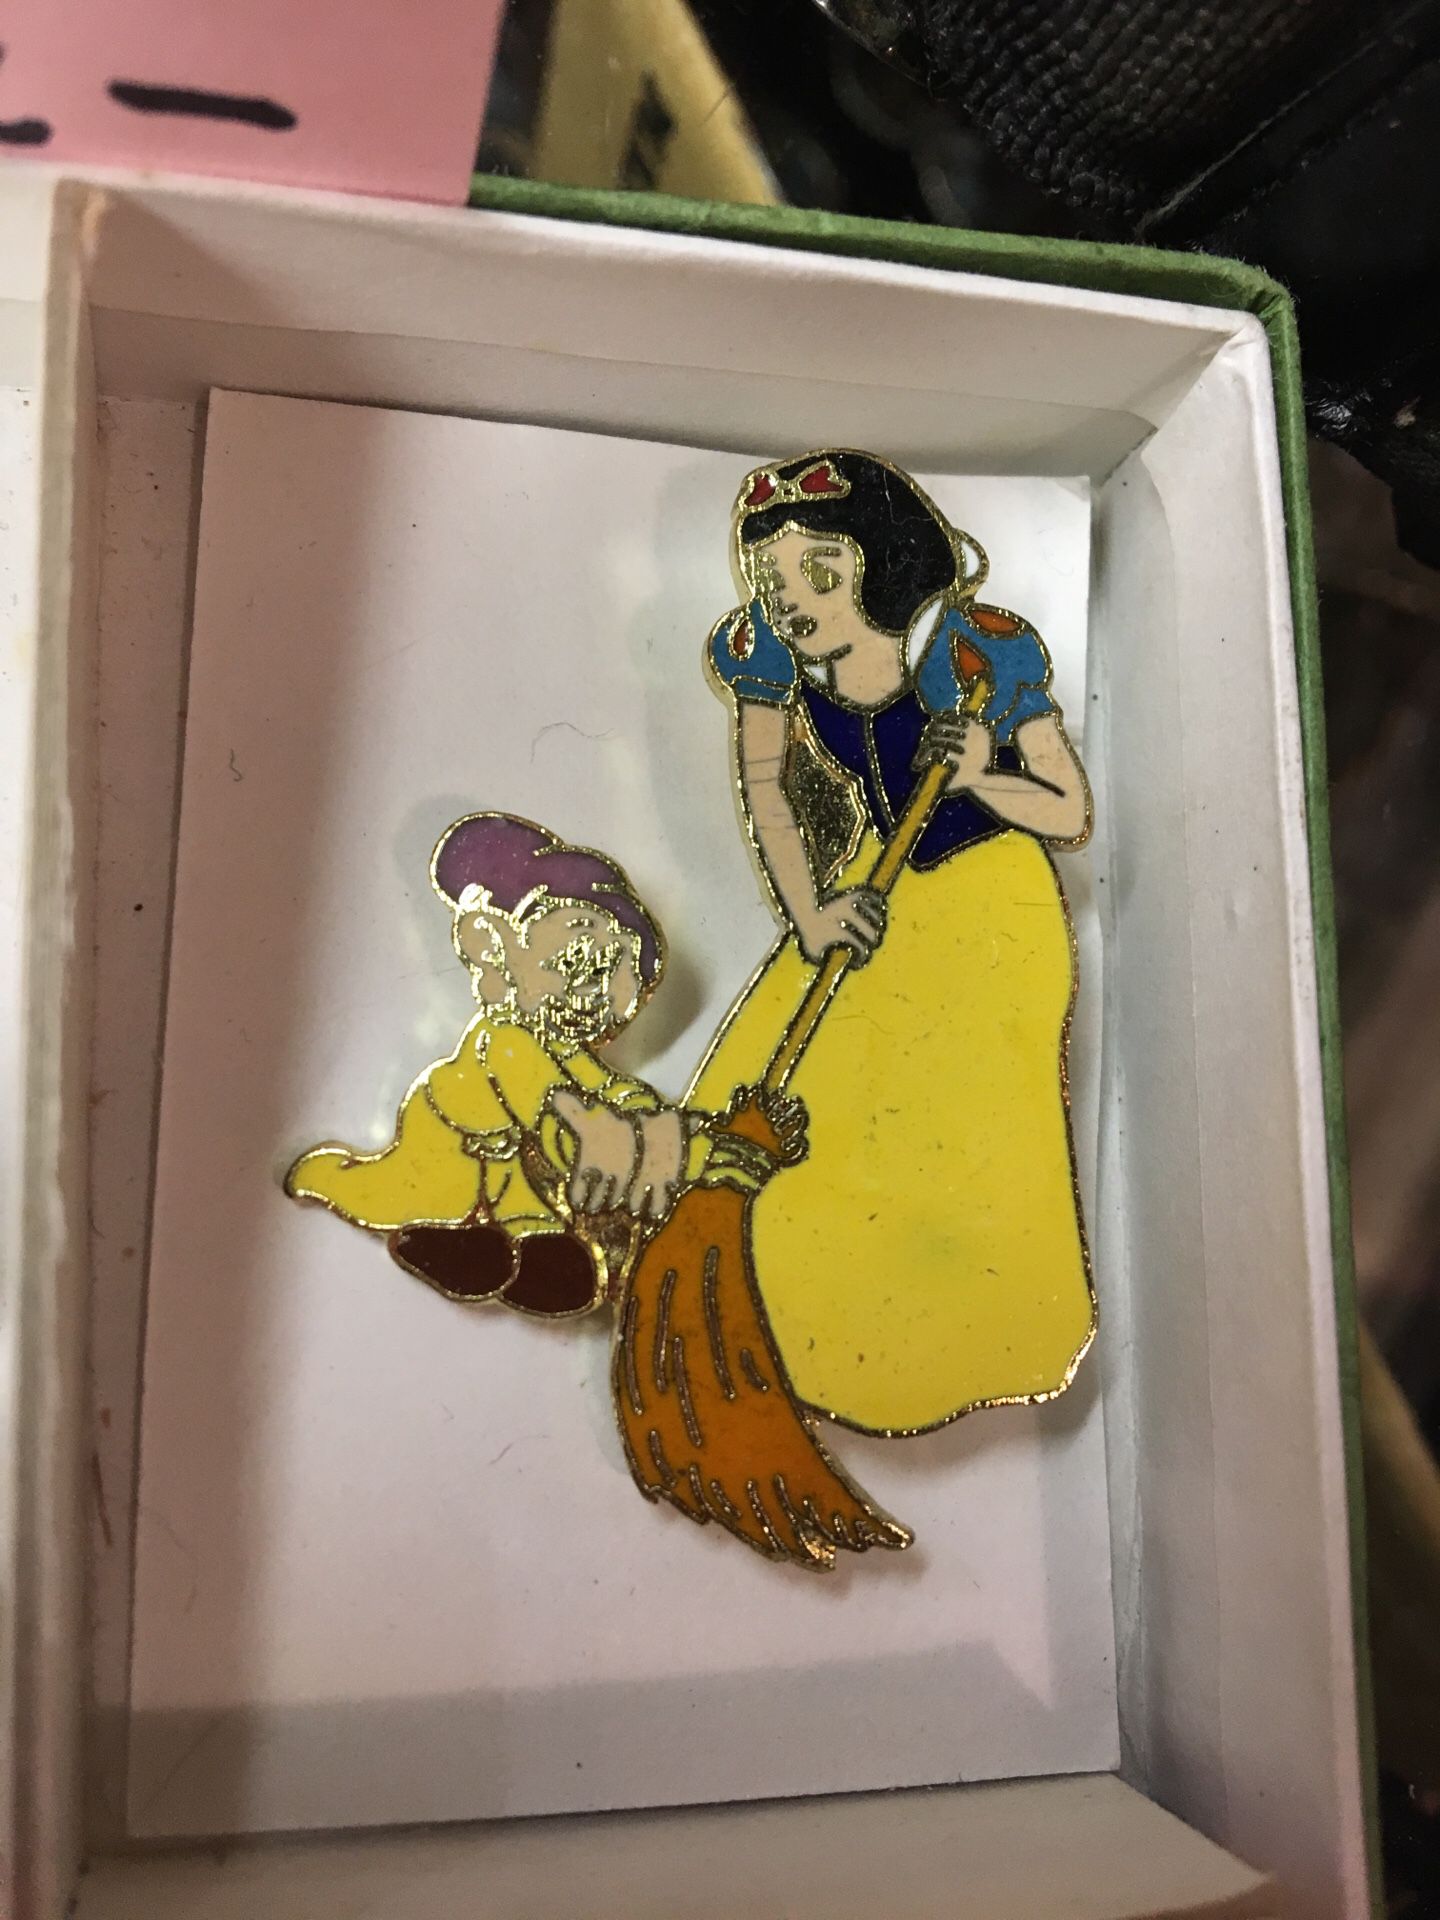 Collectible Disney Hat or jacket pins at $4 each! Or make bulk offer